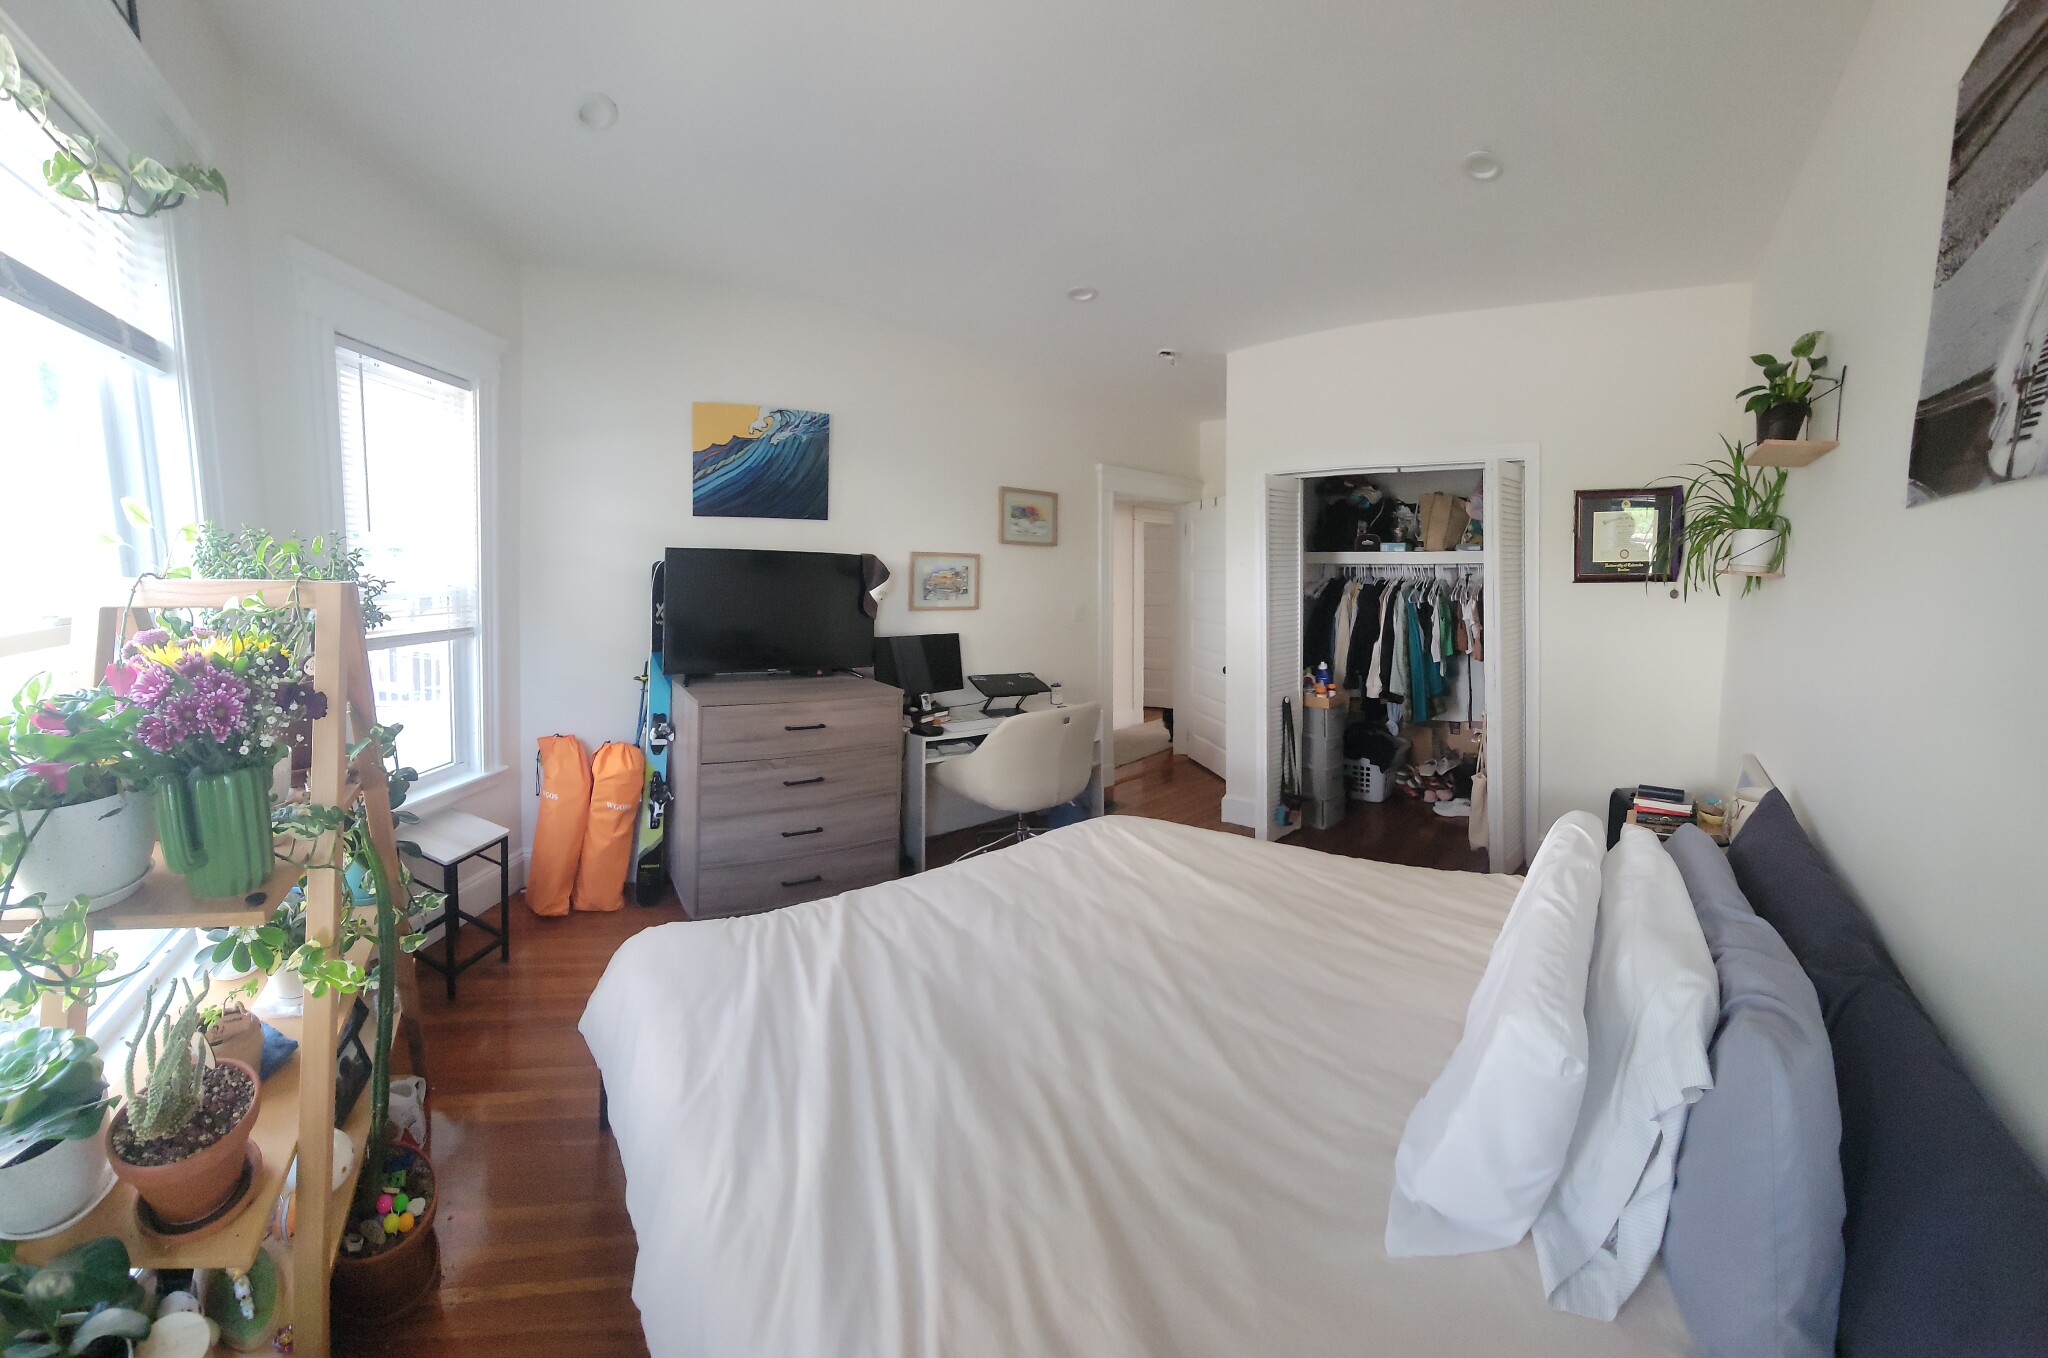 Photos of apartment on Homes Ave.,Boston MA 02122